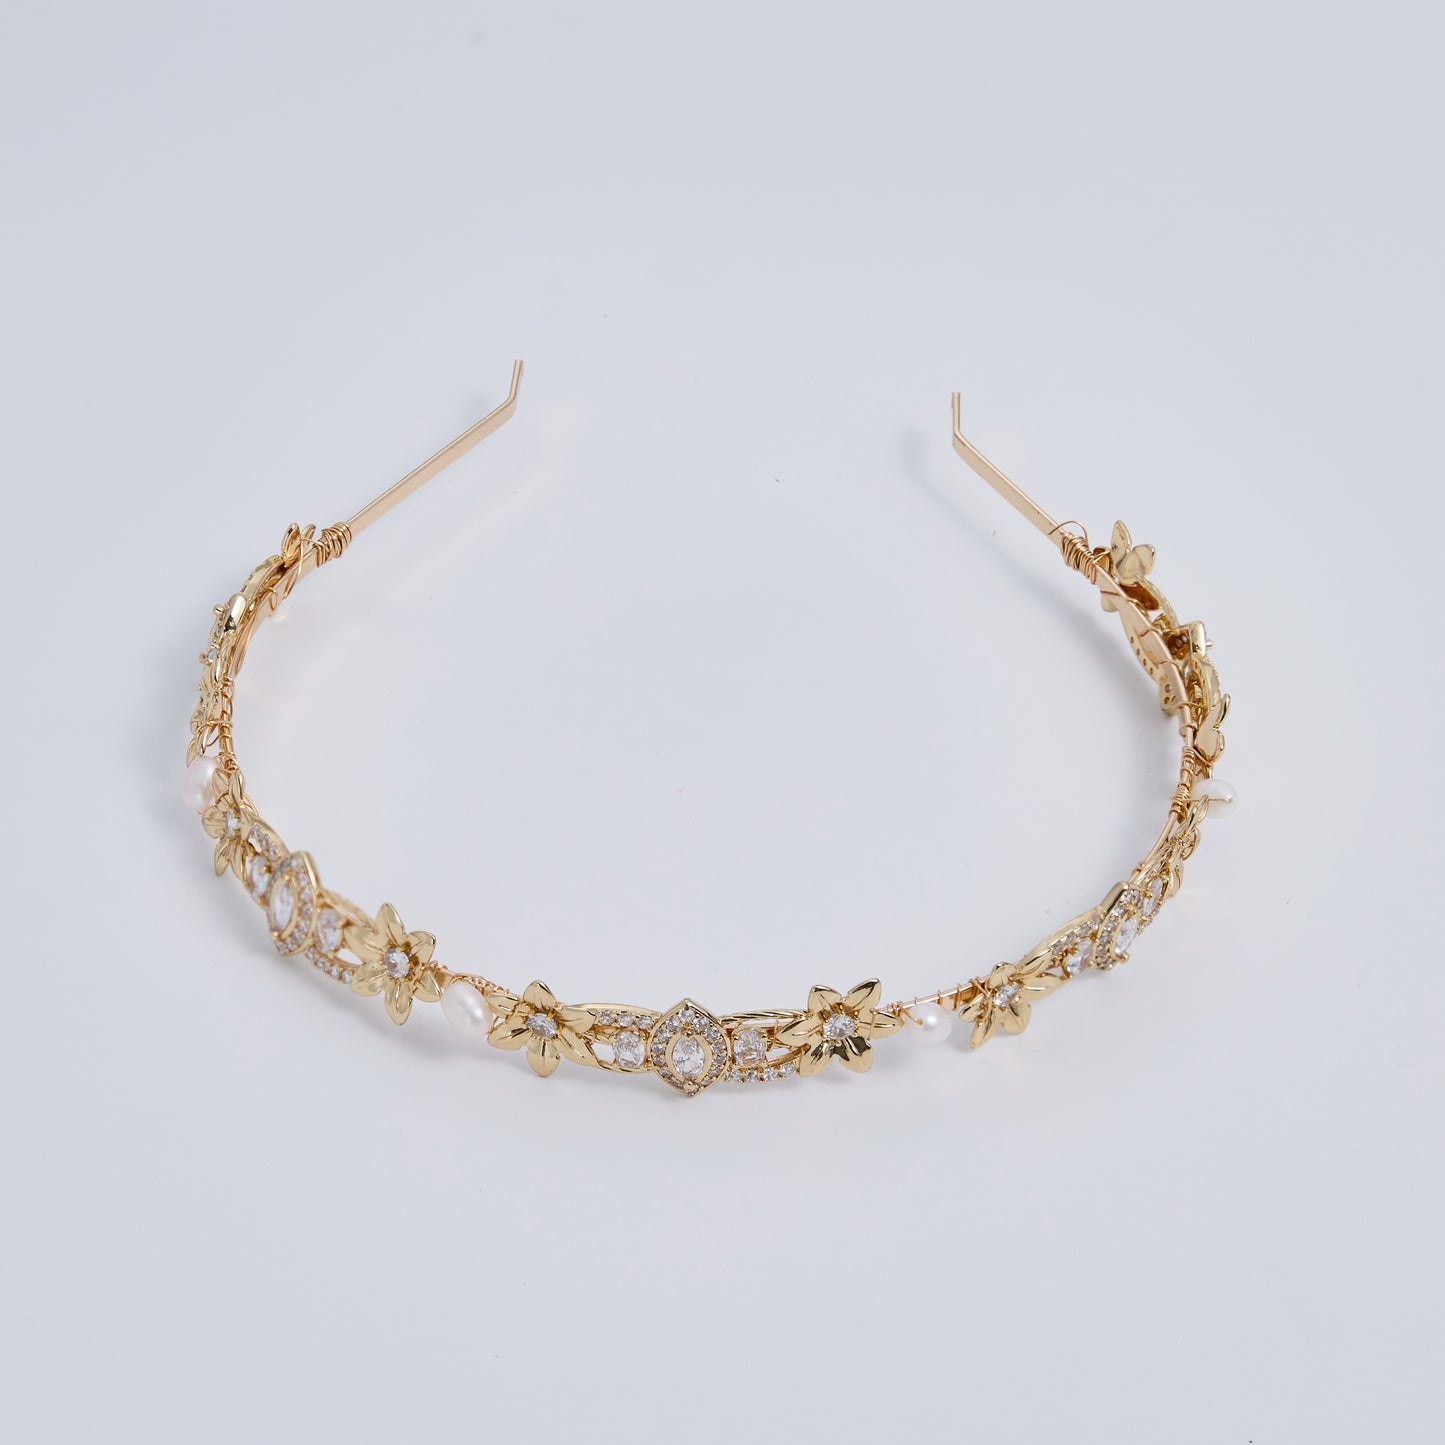 This slimline, modern gold headband is made from the most beautiful freshwater pearls and shimmering rhinestones. The minimalist floral design and timeless luxury of pearls and stones are always in style.